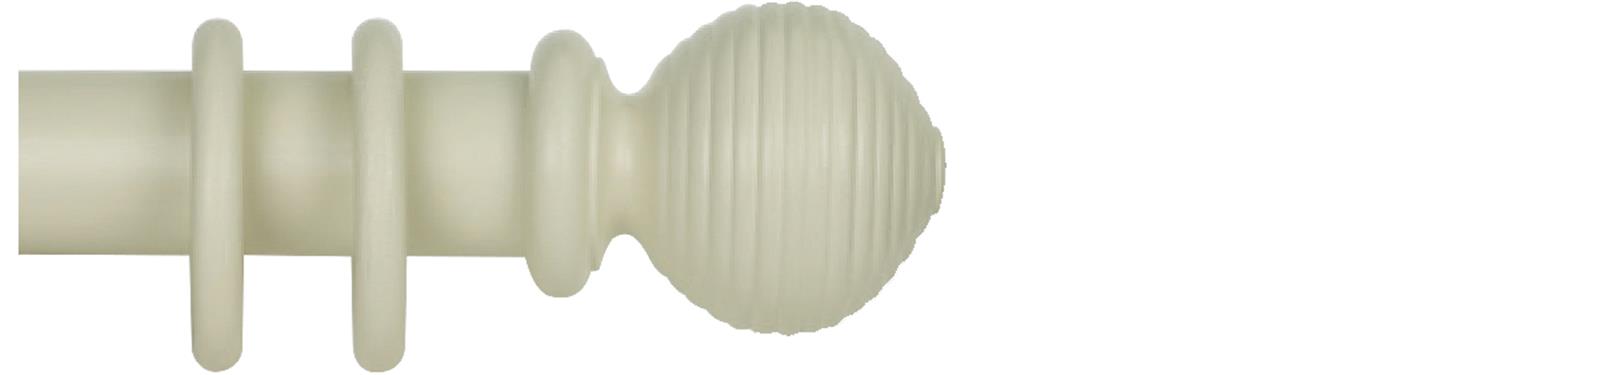 Cameron Fuller 50mm Pole Ivory Beehive